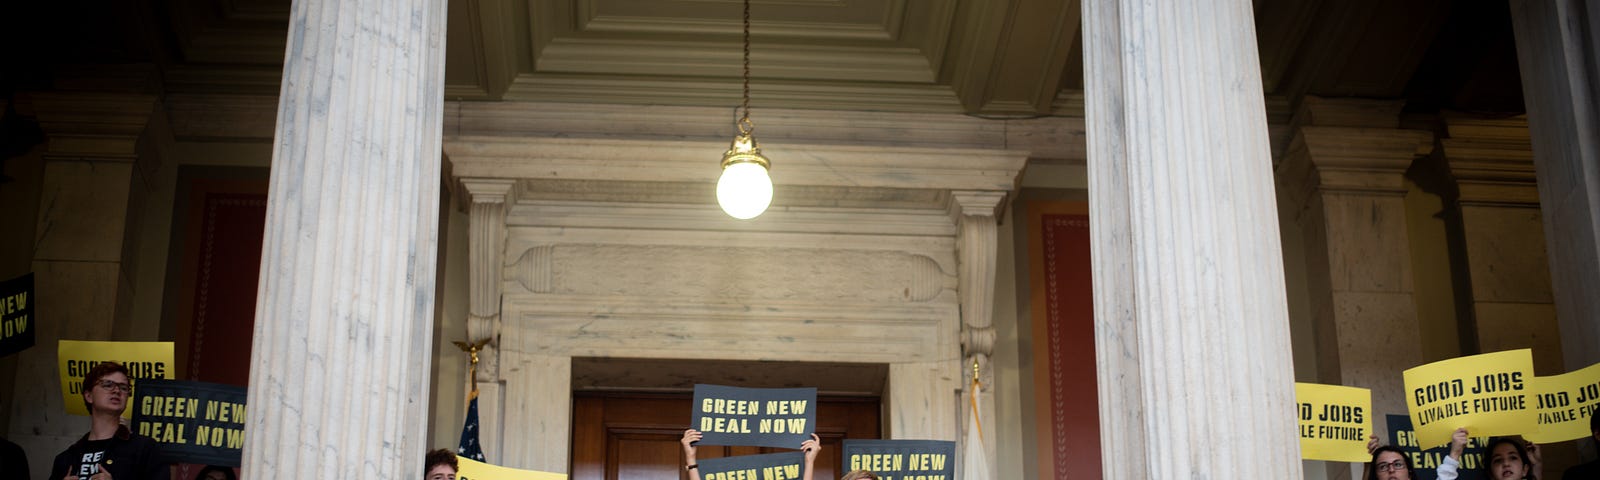 Young people with Sunrise holding “Green New Deal Now” and “Good Jobs Livable Future” signs.